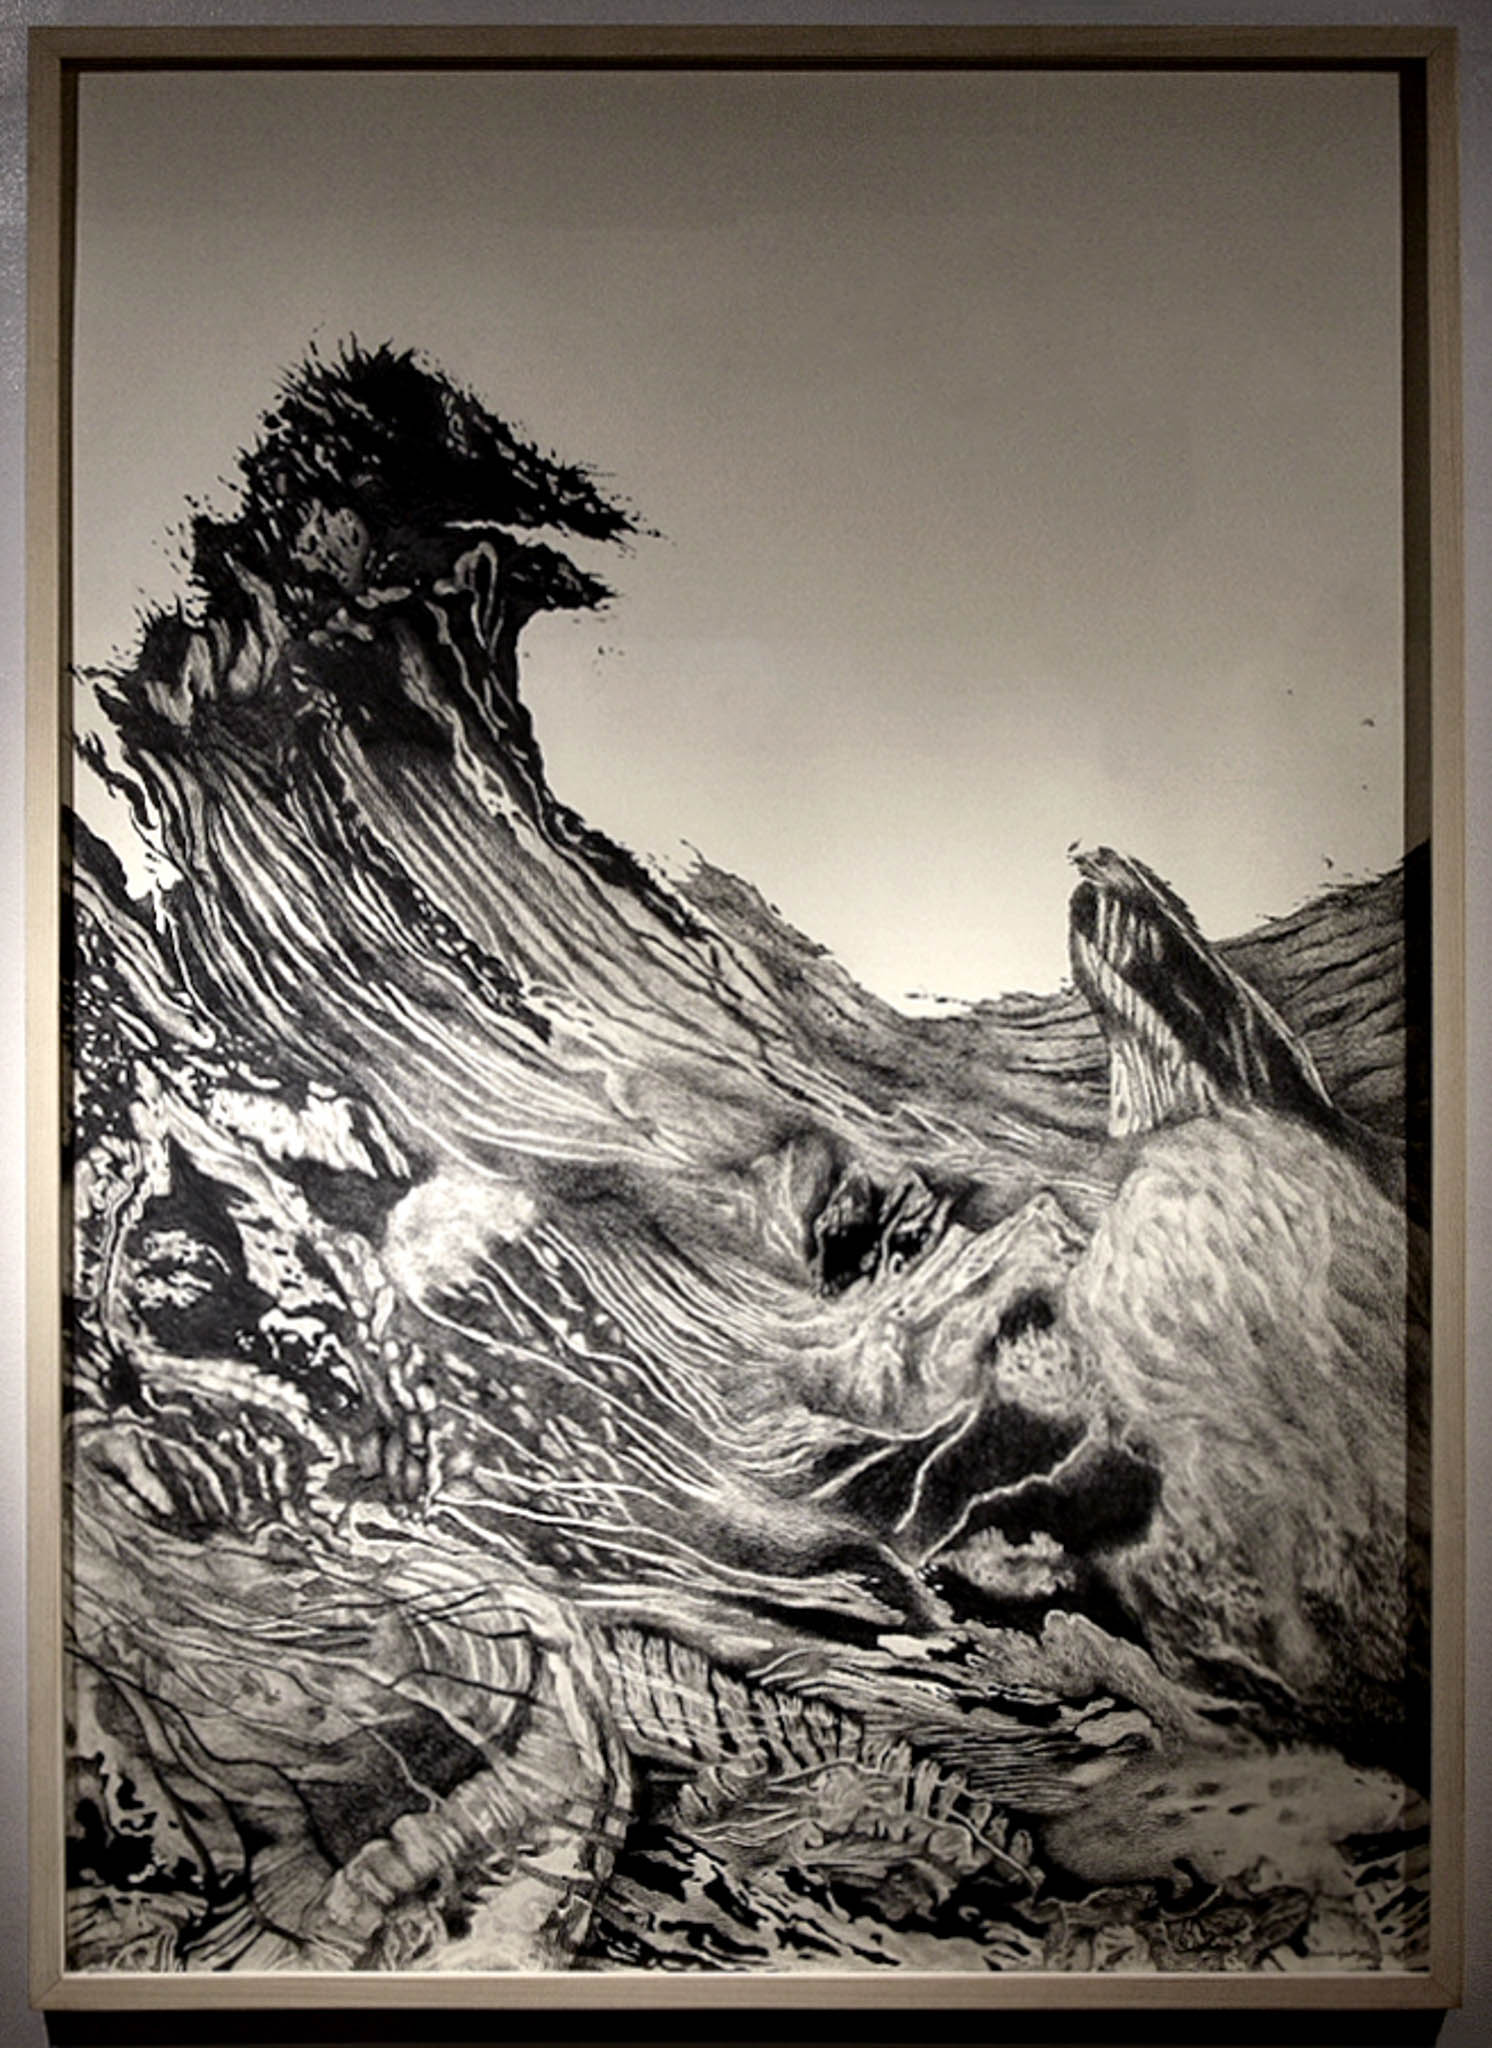 Sarah de Veyra Buyco's graphite on paper work titled Over the Waves is the artist's homage to the wave by Rembrandt Turner and Hokusai.